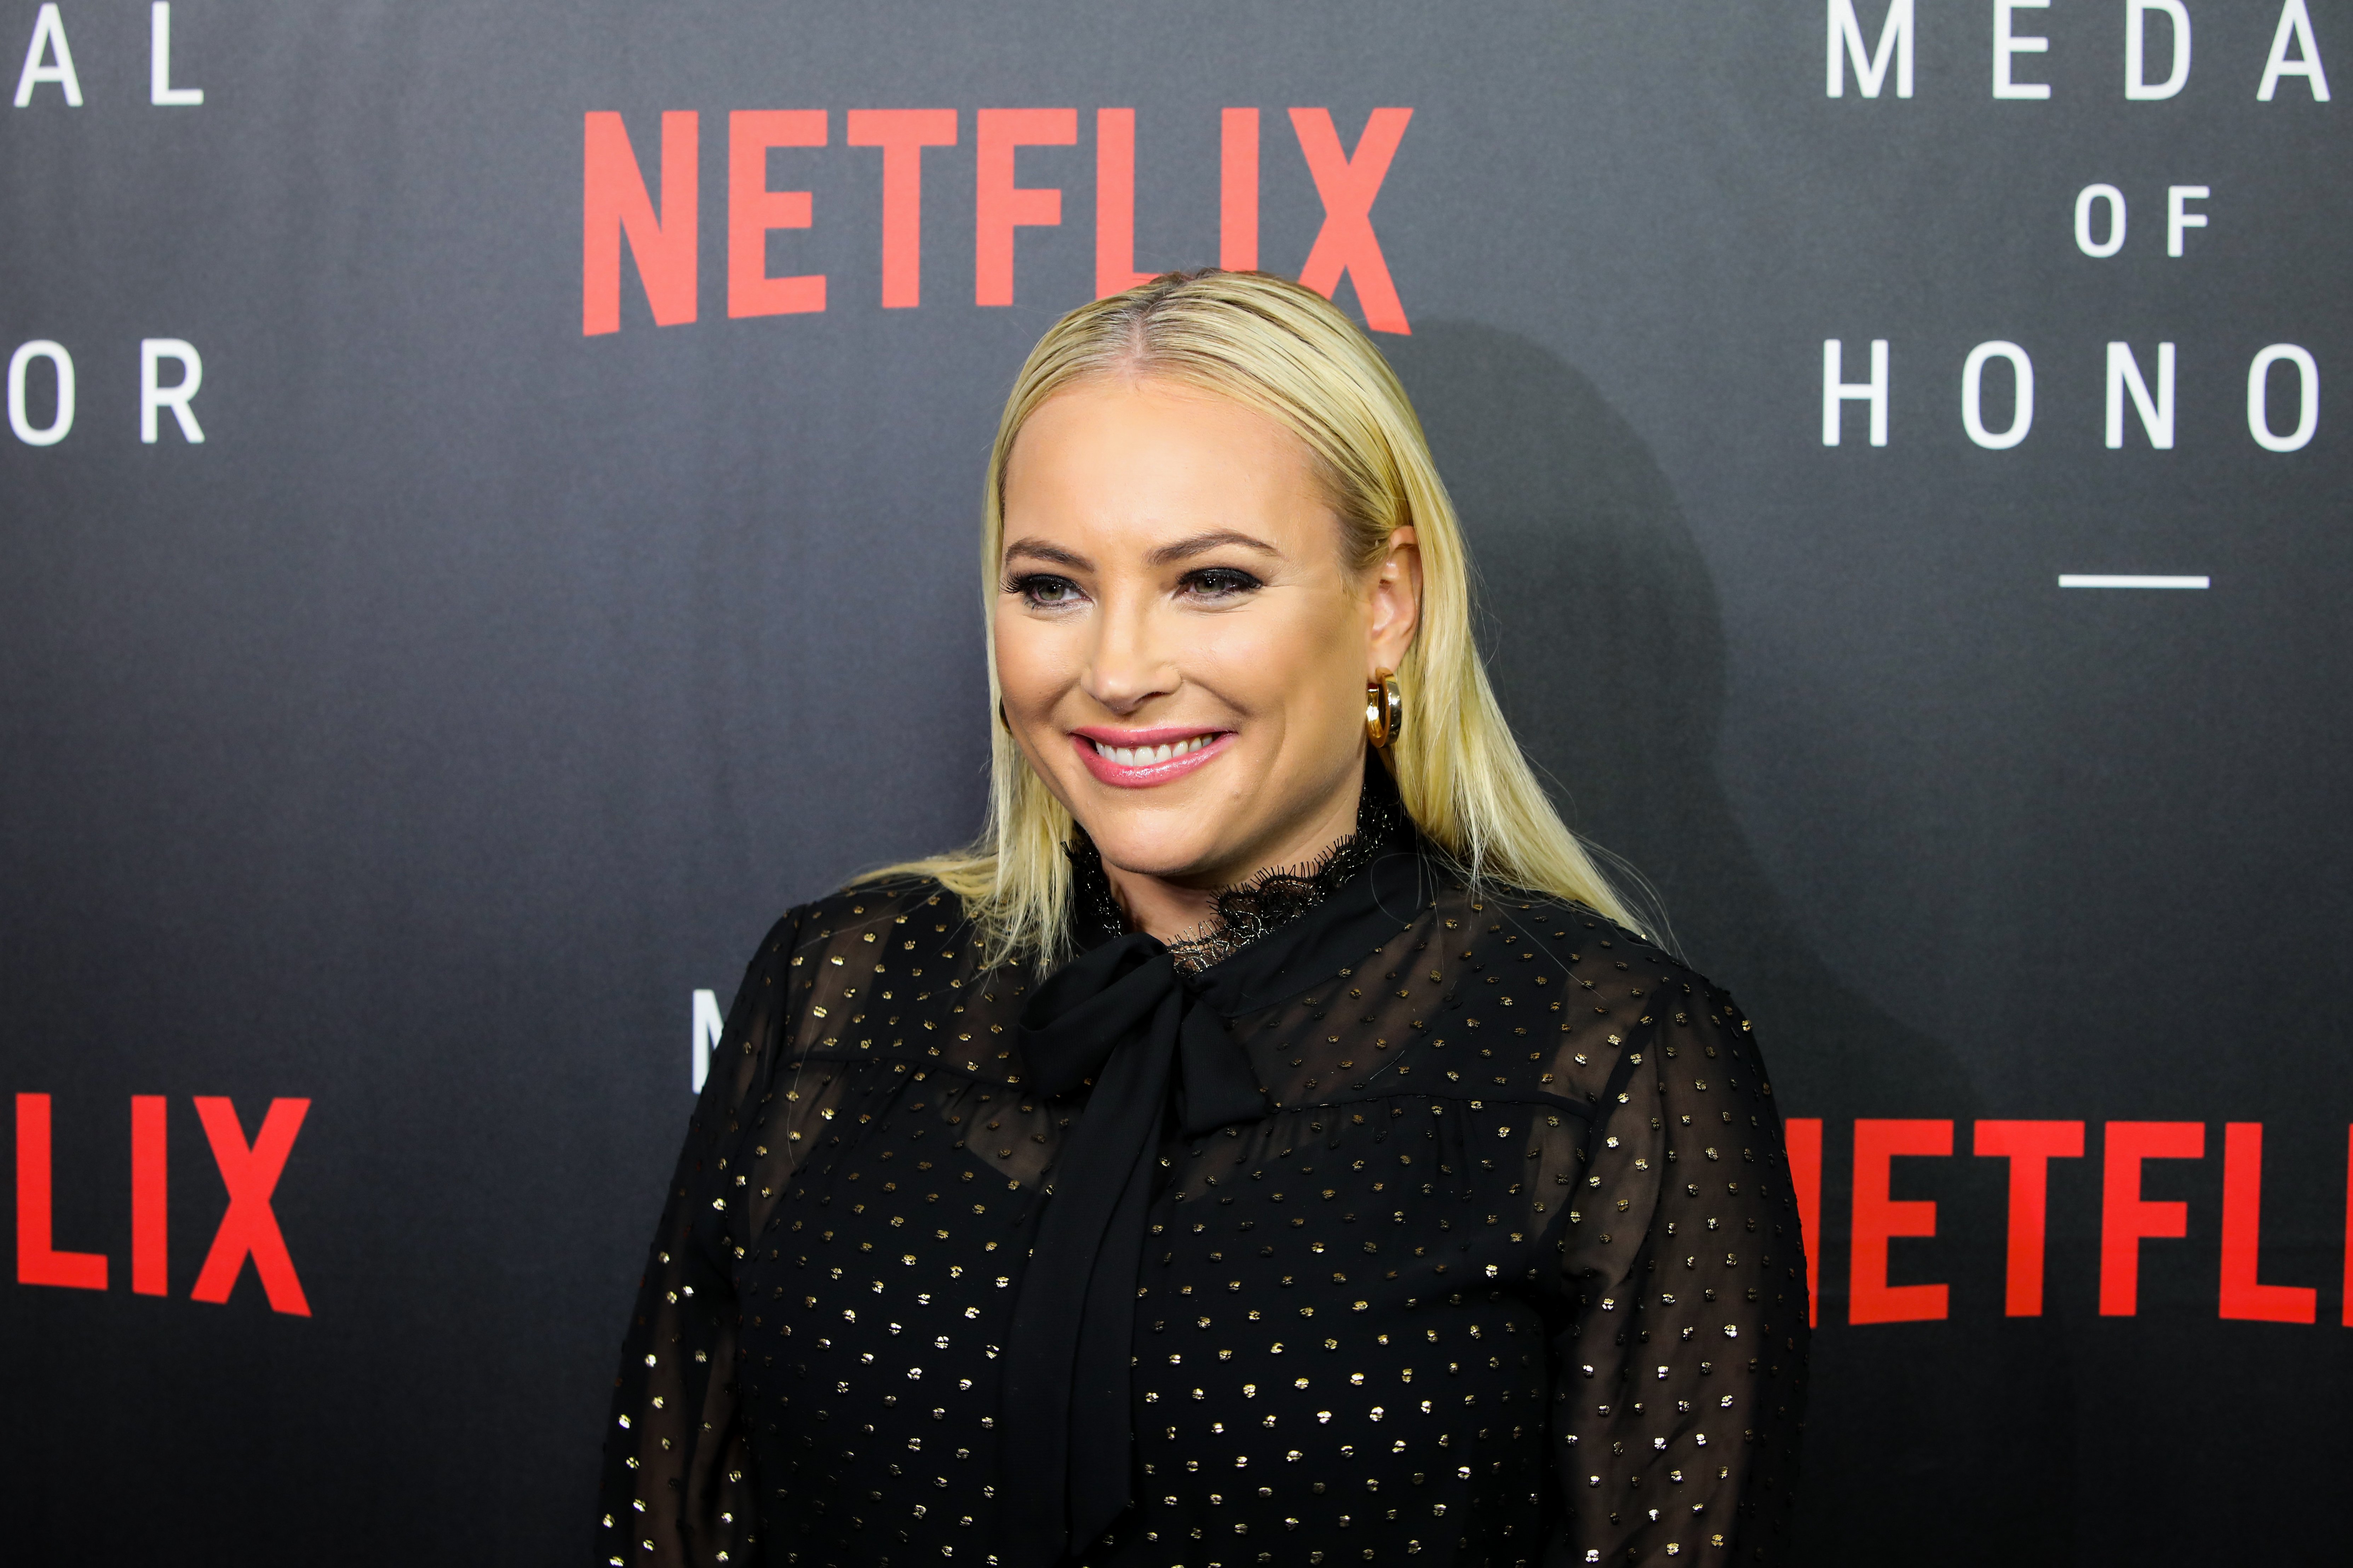 Meghan McCain pictured at the Netflix 'Medal of Honor' screening and panel discussion, 2018, Washington, DC. | Photo: Getty Images